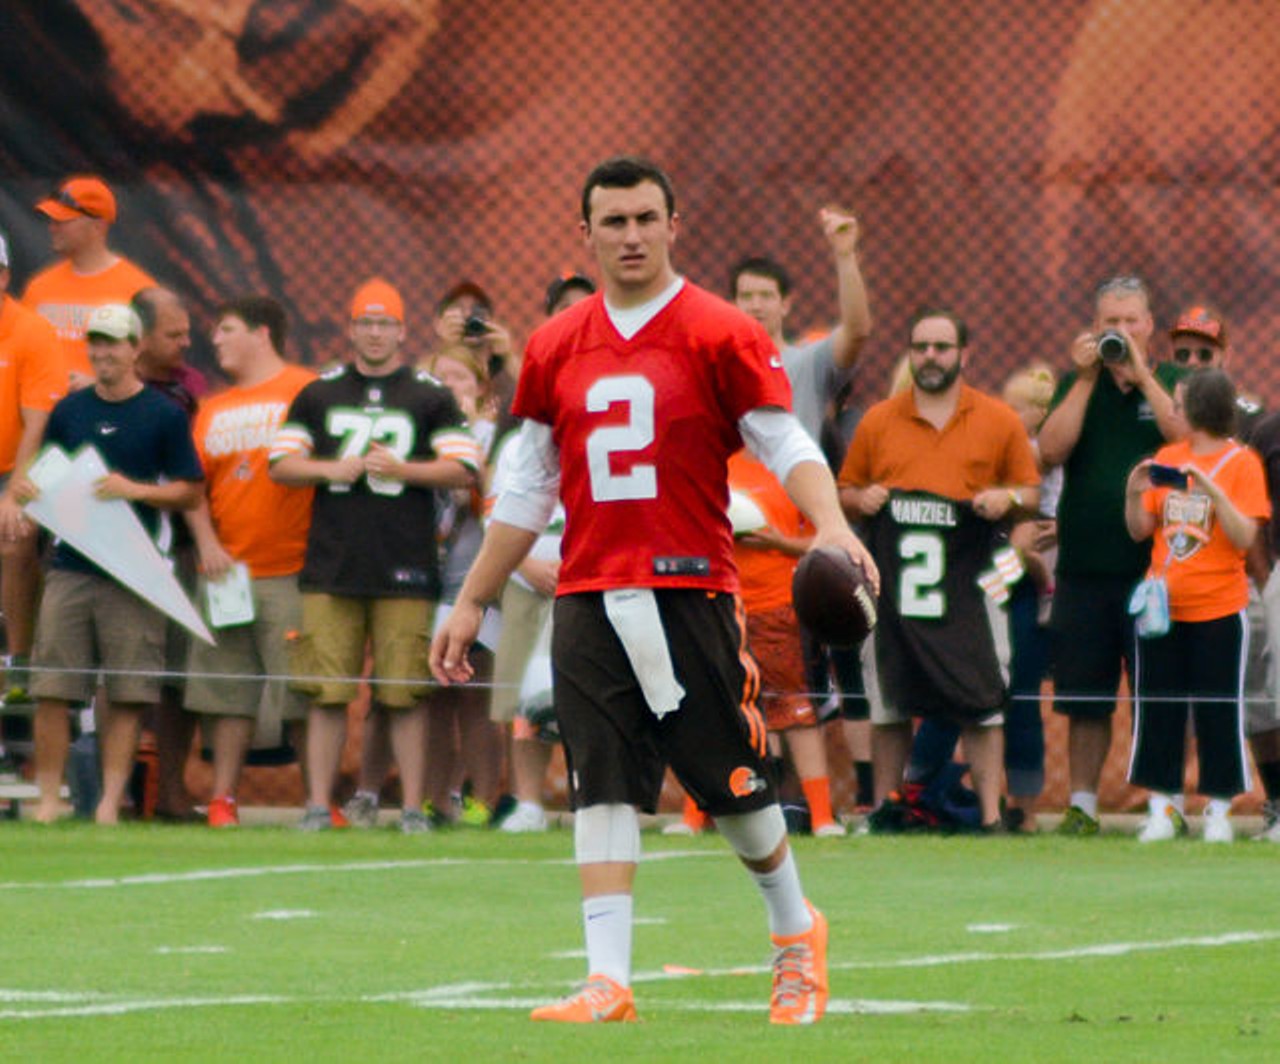 Johnny Football arrives on the shores of Lake Erie in this preseason matchup between the Cleveland Browns and the St. Louis Rams. If you’re not watching the Cleveland Gladiators in the ArenaBowl (or if it’s sold out, dare we assume) feel free to sidle over to FirstEnergy Stadium to check out every last bench warmer on new head coach Mike Pettine’s blue collar roster. We cannot overstress how awful traffic is going to be downtown tonight, so consider alternate transit options. And be advised, of course, that preseason NFL football is always pretty lame. Still, you’ll get to see the starting QB battle in all its hysteria. HOYER! HOYER! HOYER! HOYER! Kickoff’s at 8 p.m. (Allard)